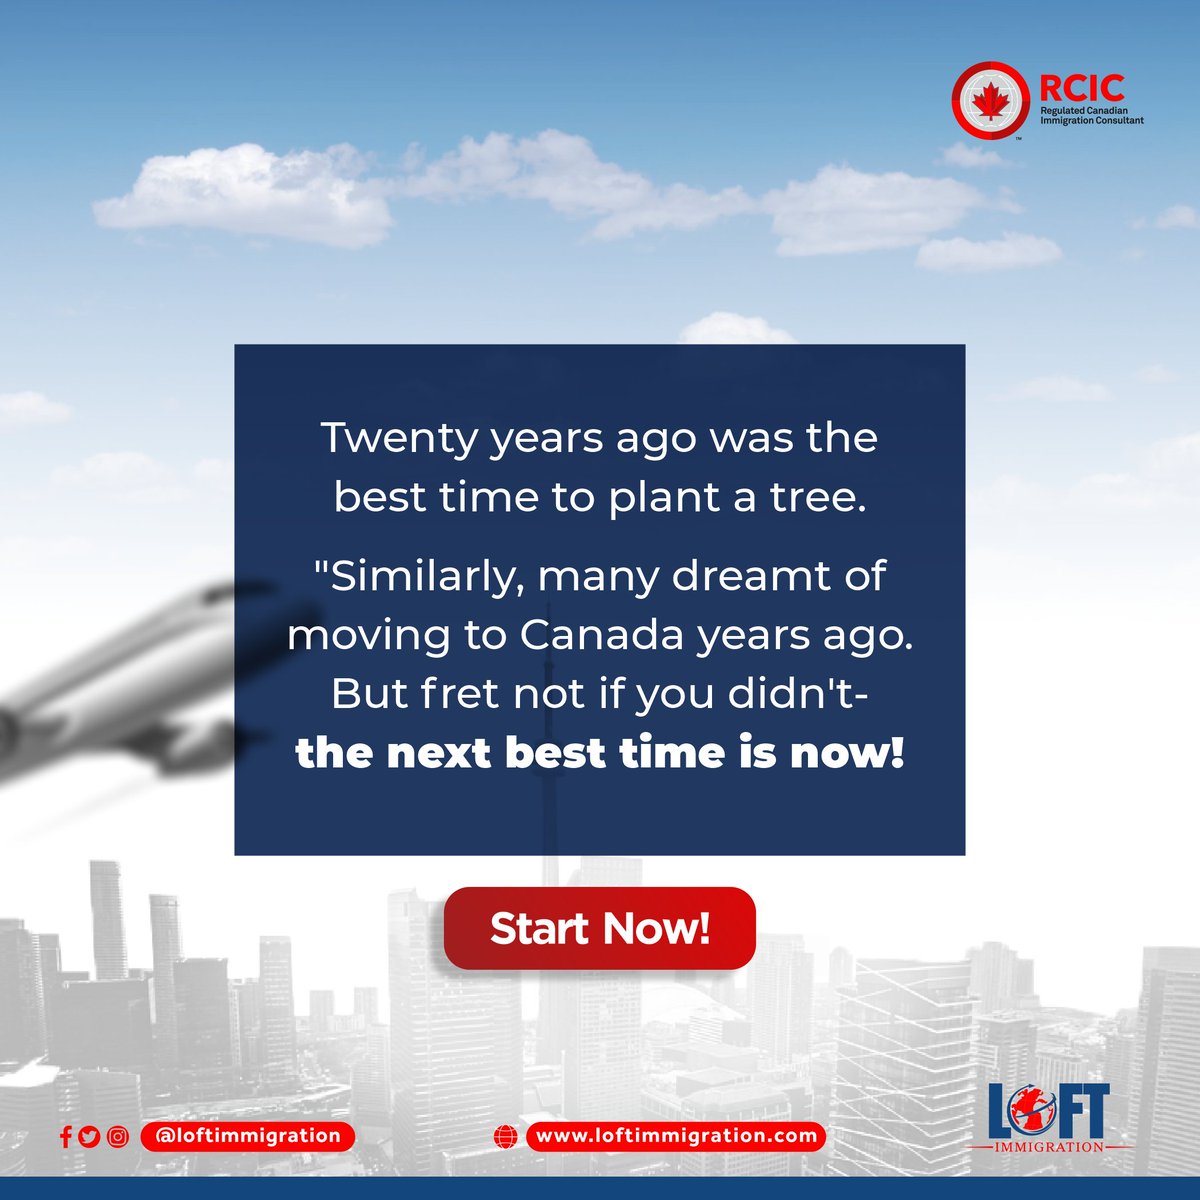 Dreaming of coming to Canada? Let's explore the timeless question: When is the best time to make the move from Nigeria to Canada? Swipe to find out.

Start your journey now! Book a FREE Consultation Call us today.

#loftimmigration #canadaimmigration #movetocanada